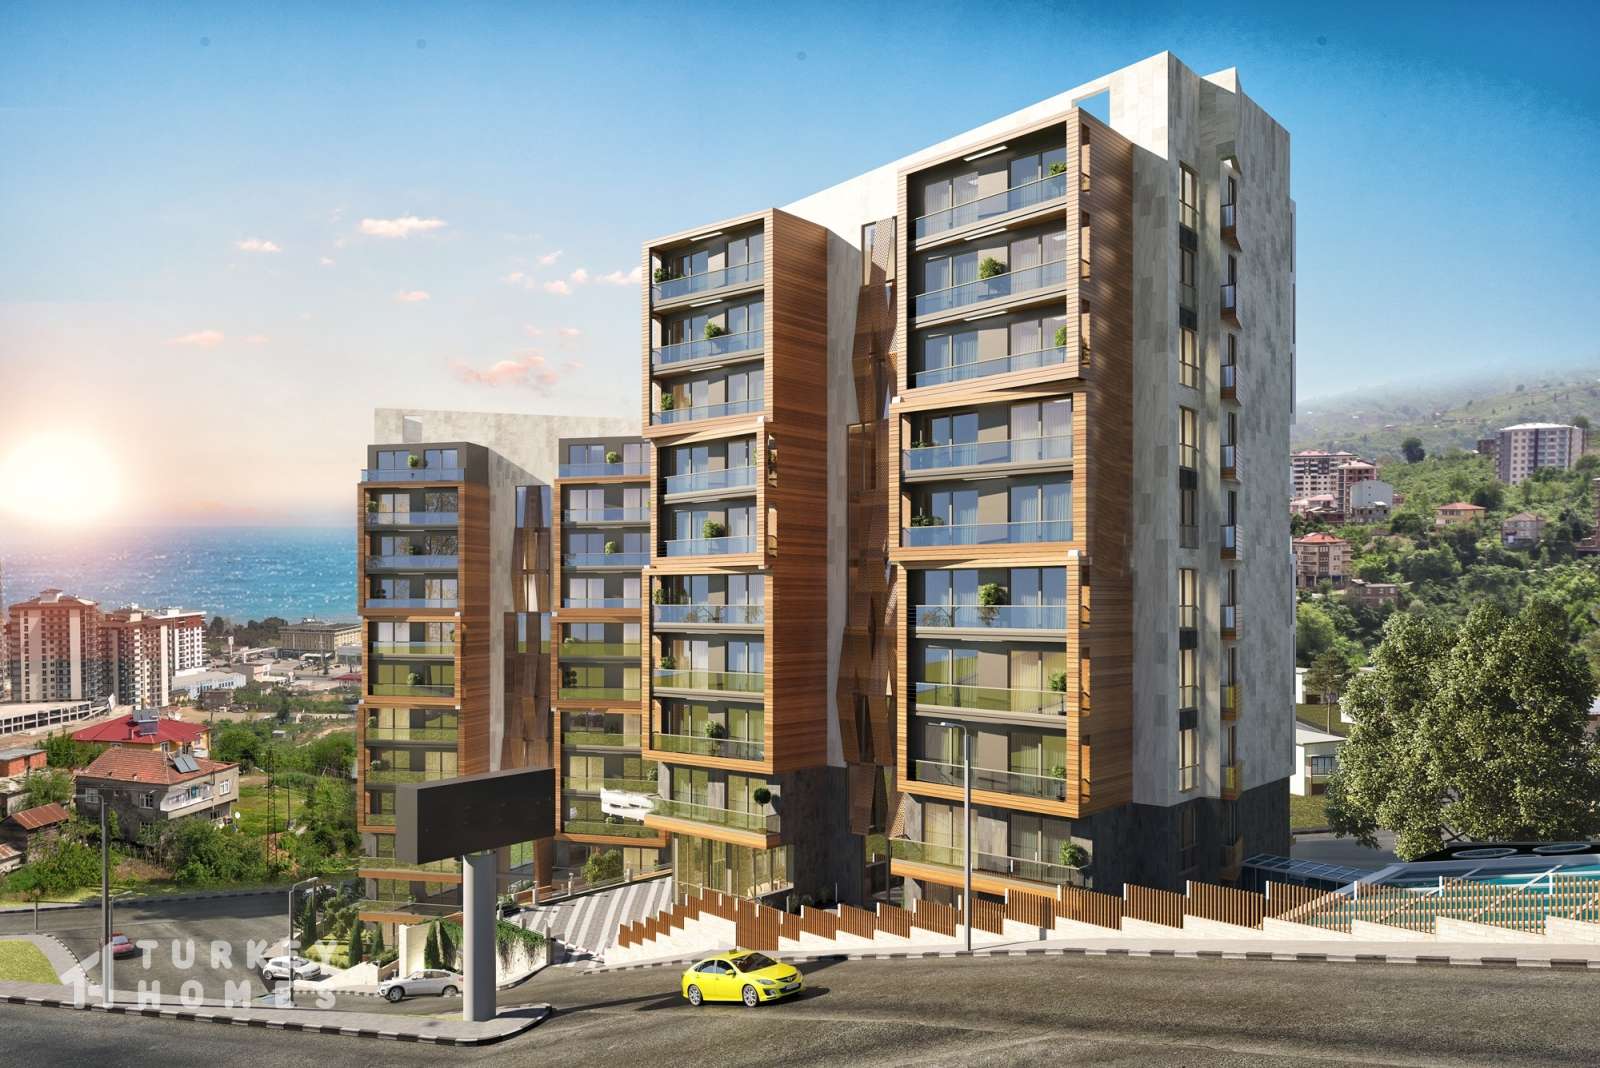 Trabzon Sea View Investment Apartments - Glass balconies